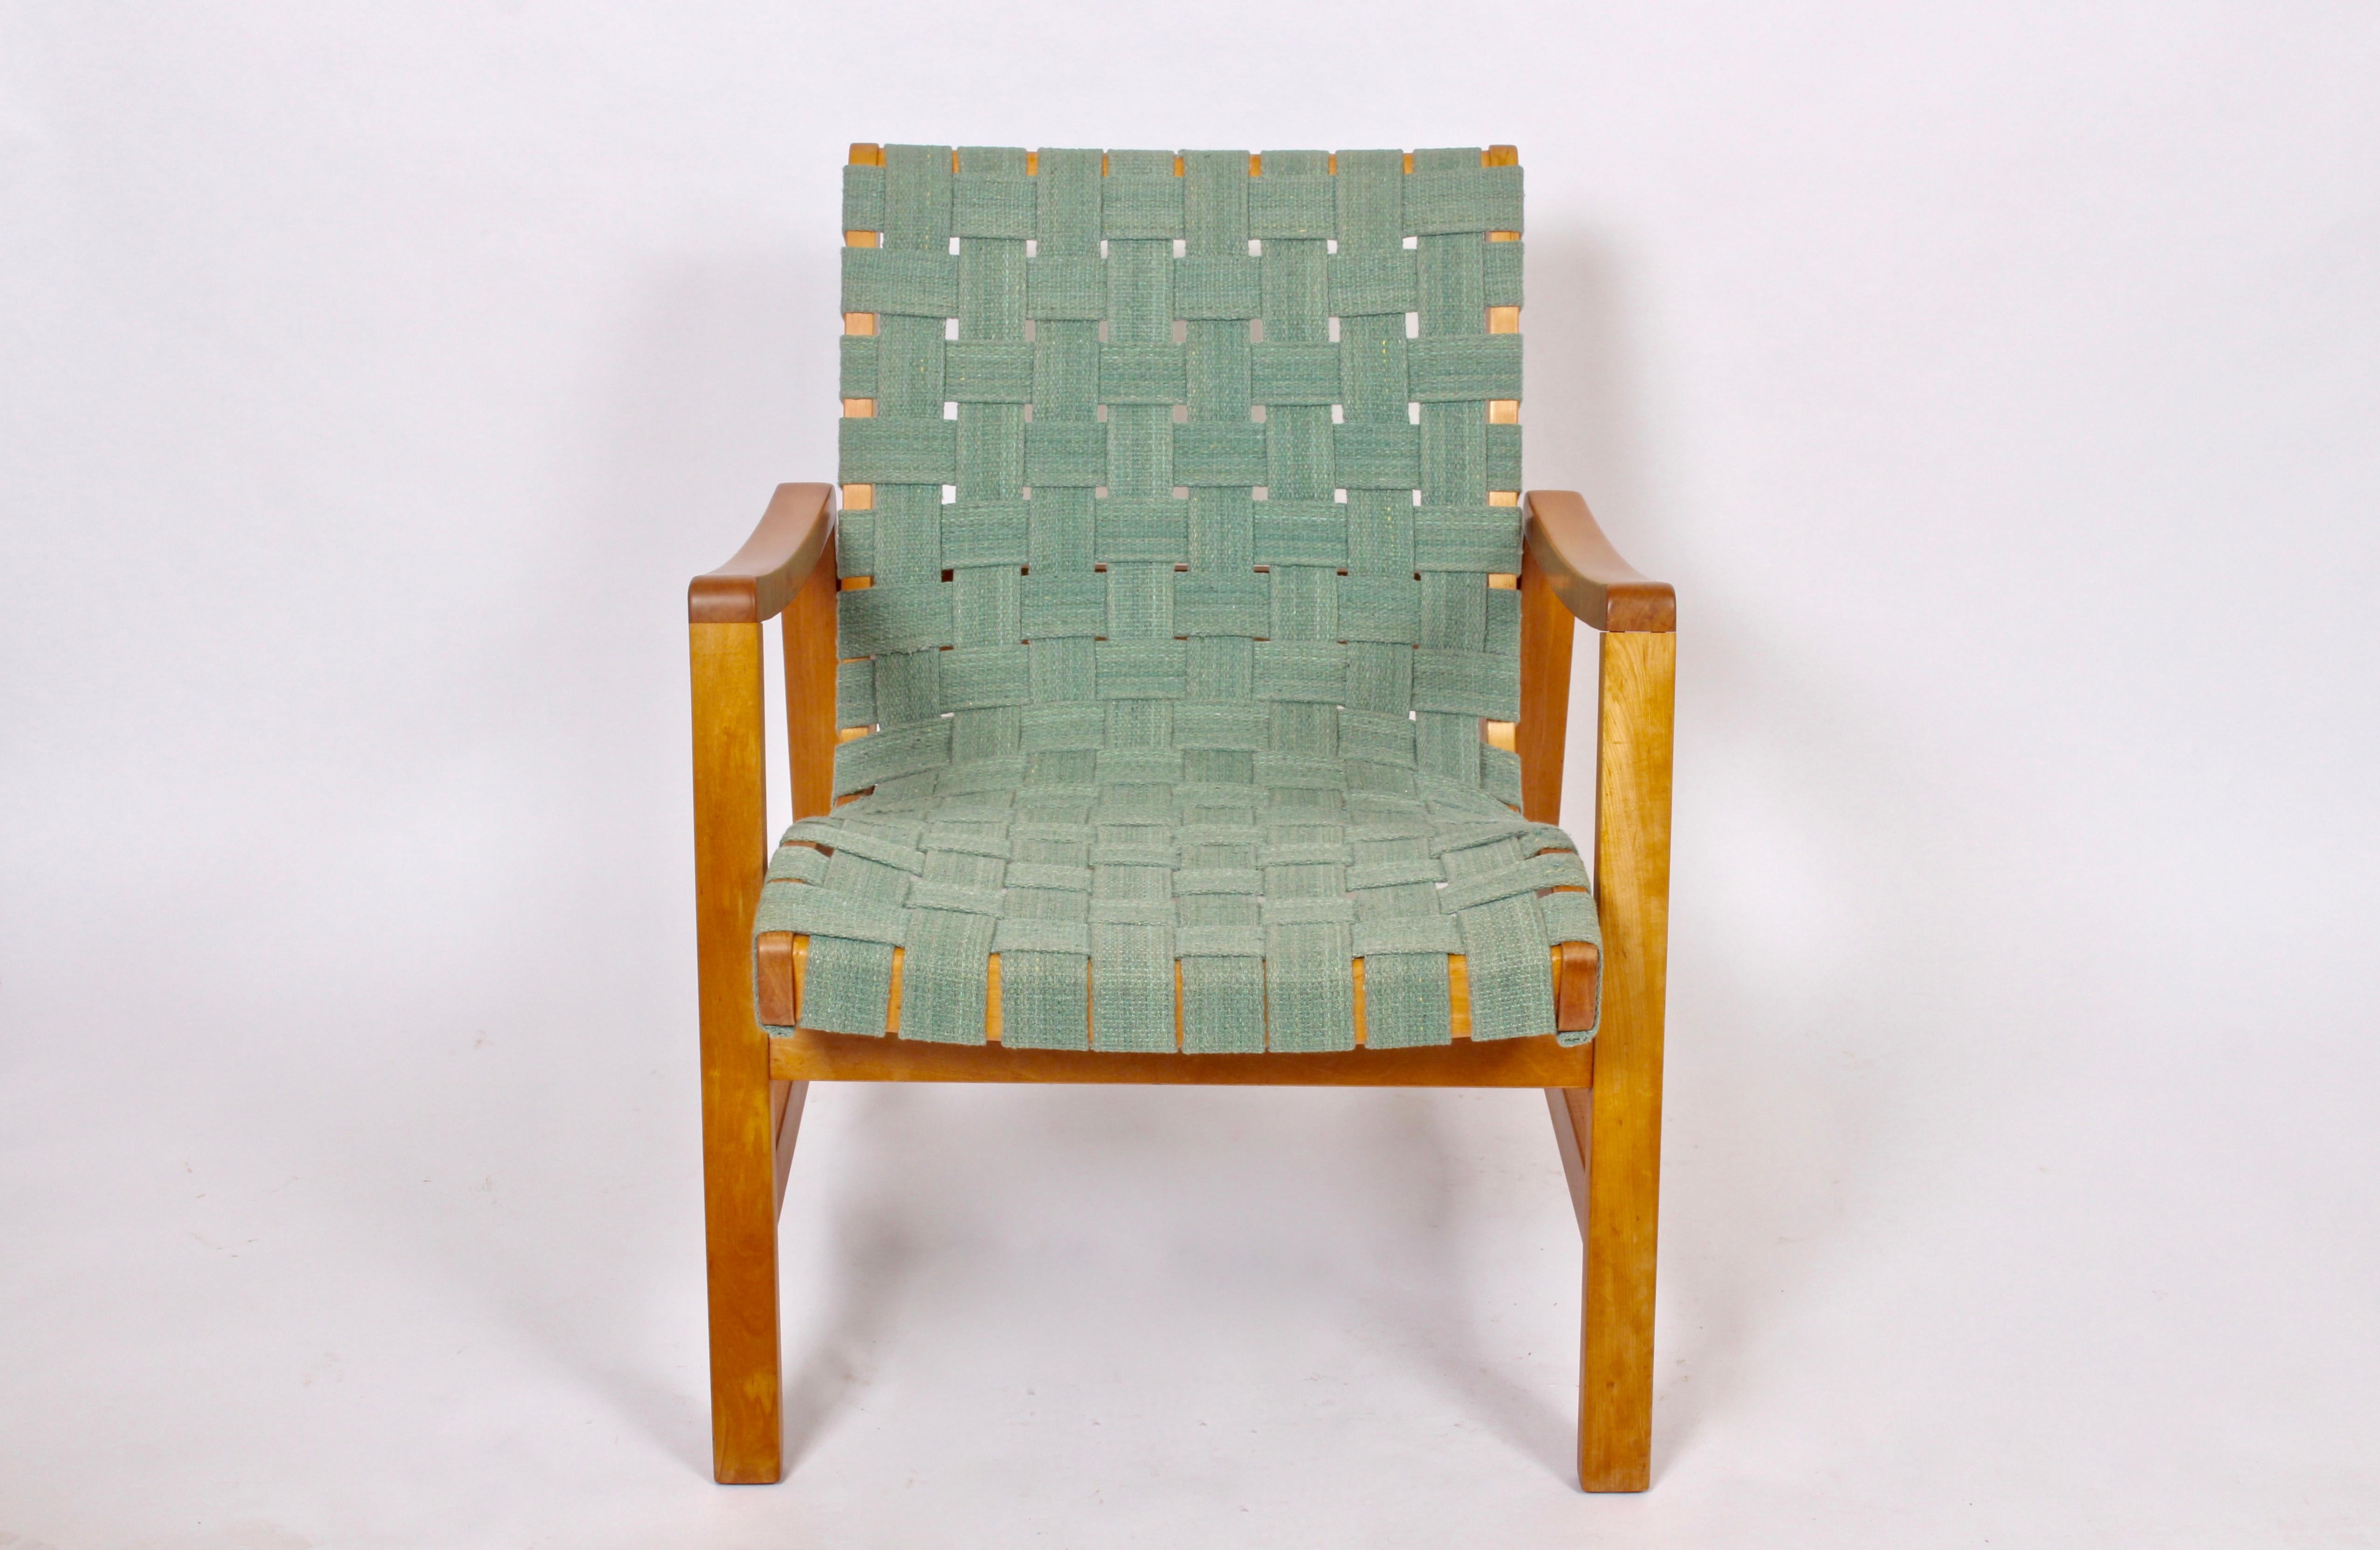 Early Jens Risom for Knoll Associates, Inc. Maple armchair with woven straps. Featuring Maple framework with newly woven straps in Pale Green. 2 pieces. With early Knoll label to frame. Designed 1943. As seen in the permanent collection of the